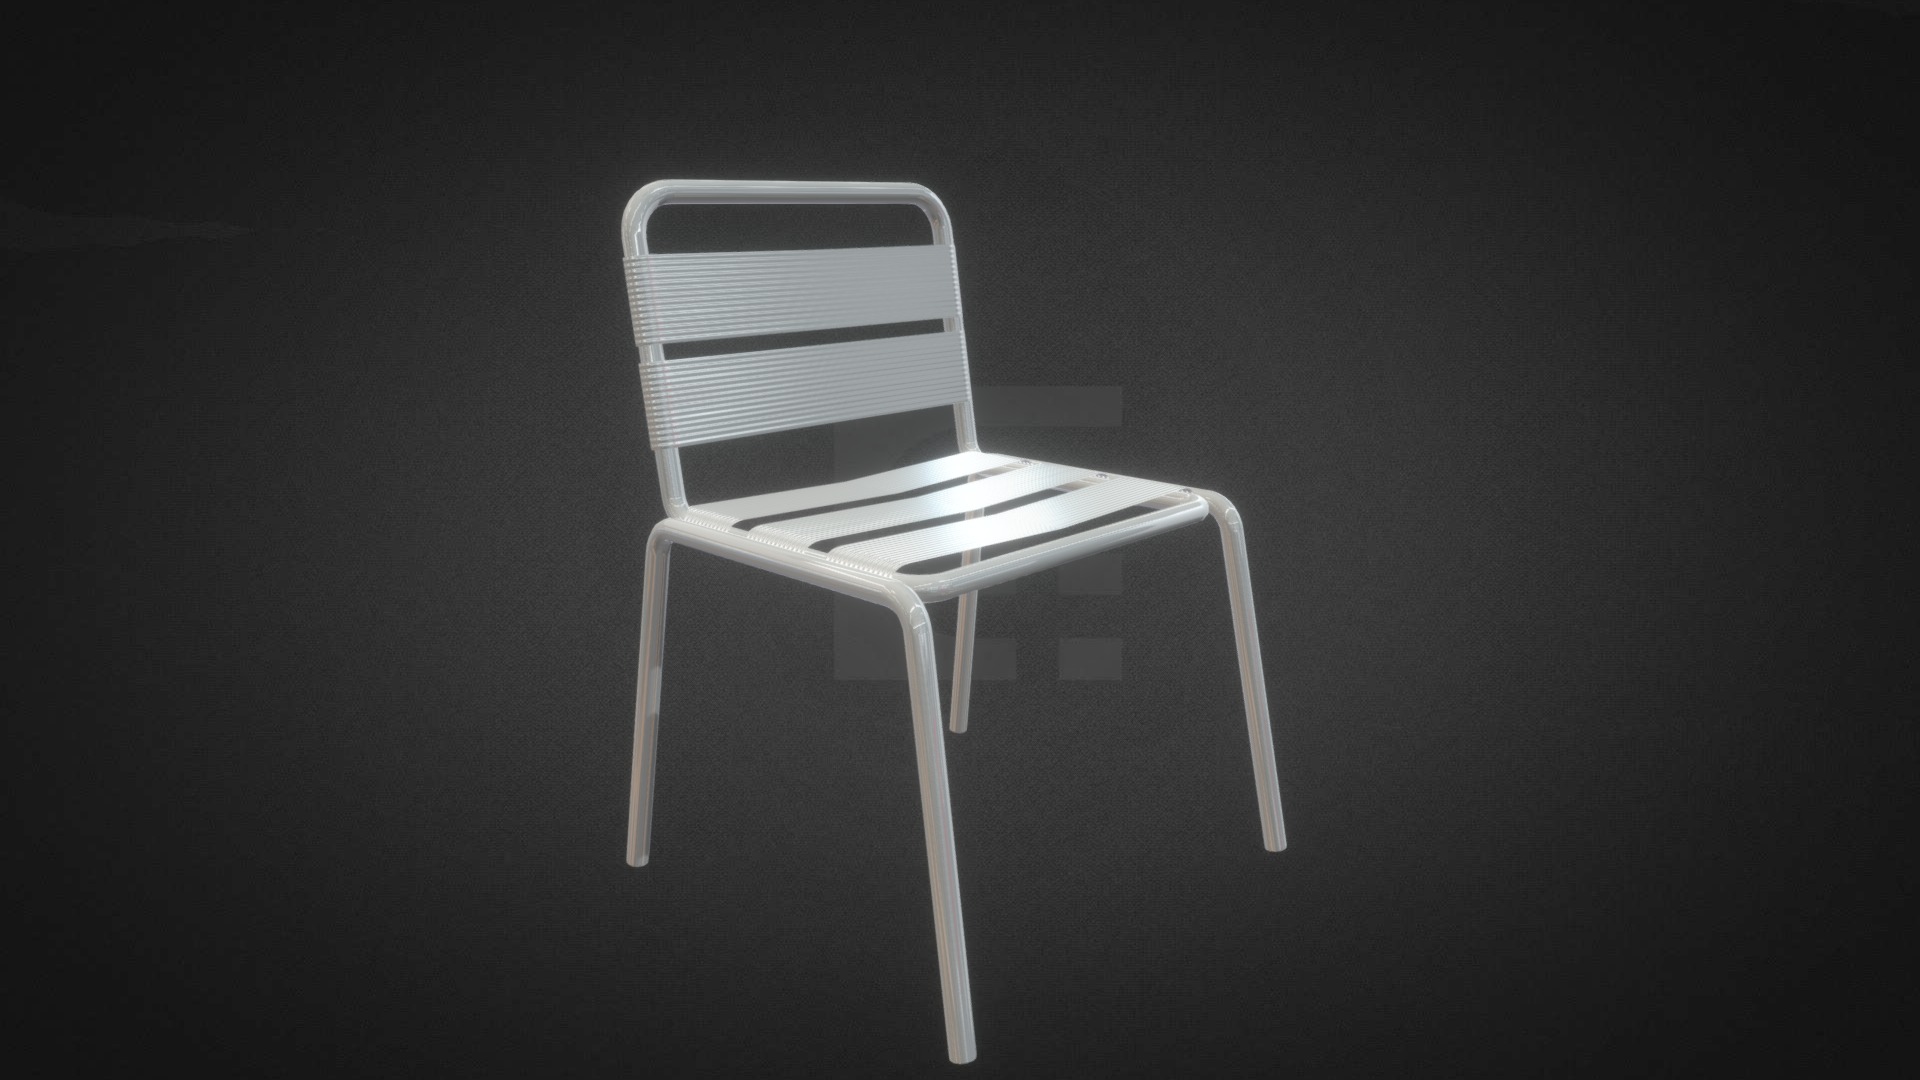 3D model Aluminium Chair Hire - This is a 3D model of the Aluminium Chair Hire. The 3D model is about a white chair with a black background.